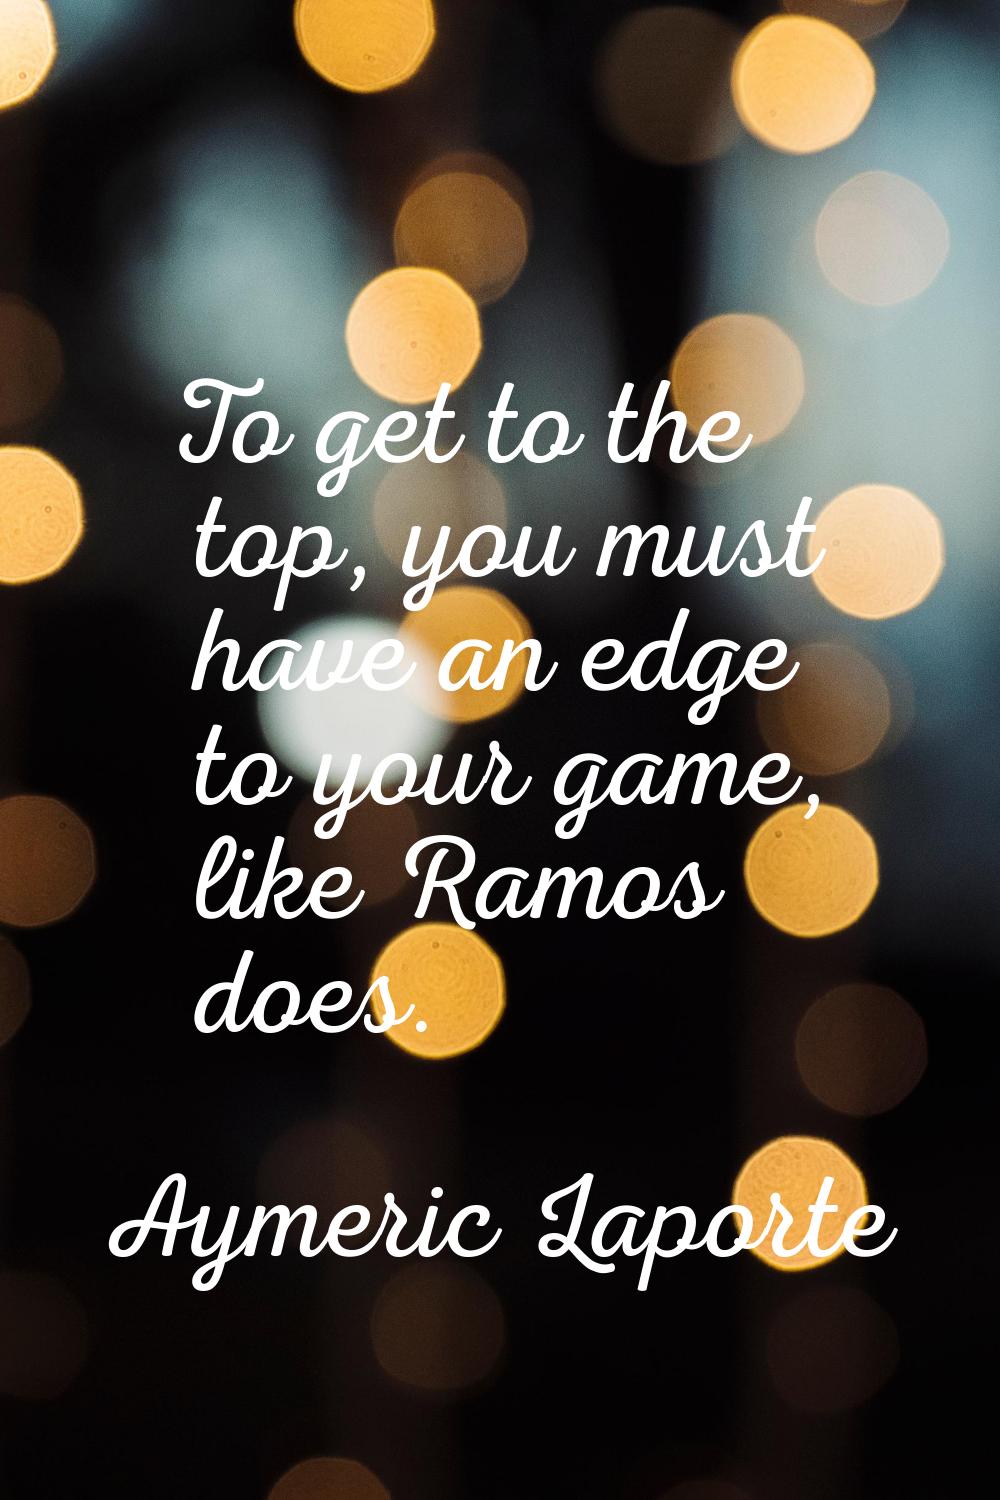 To get to the top, you must have an edge to your game, like Ramos does.